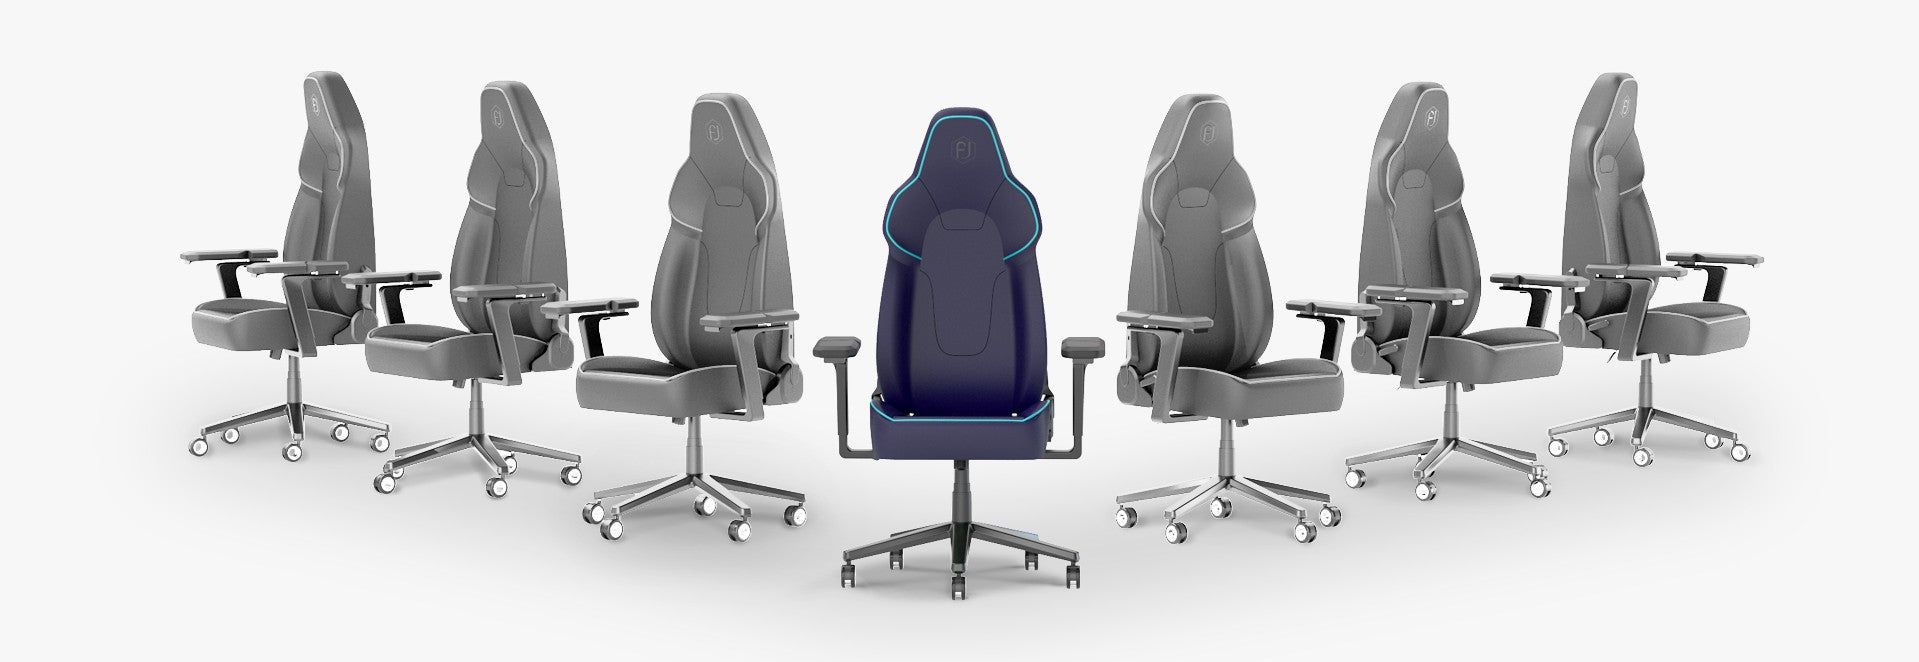 Variety of Flujo ergonomic office chairs displayed in grayscale, highlighting the sleek design and customizable features for optimal support.